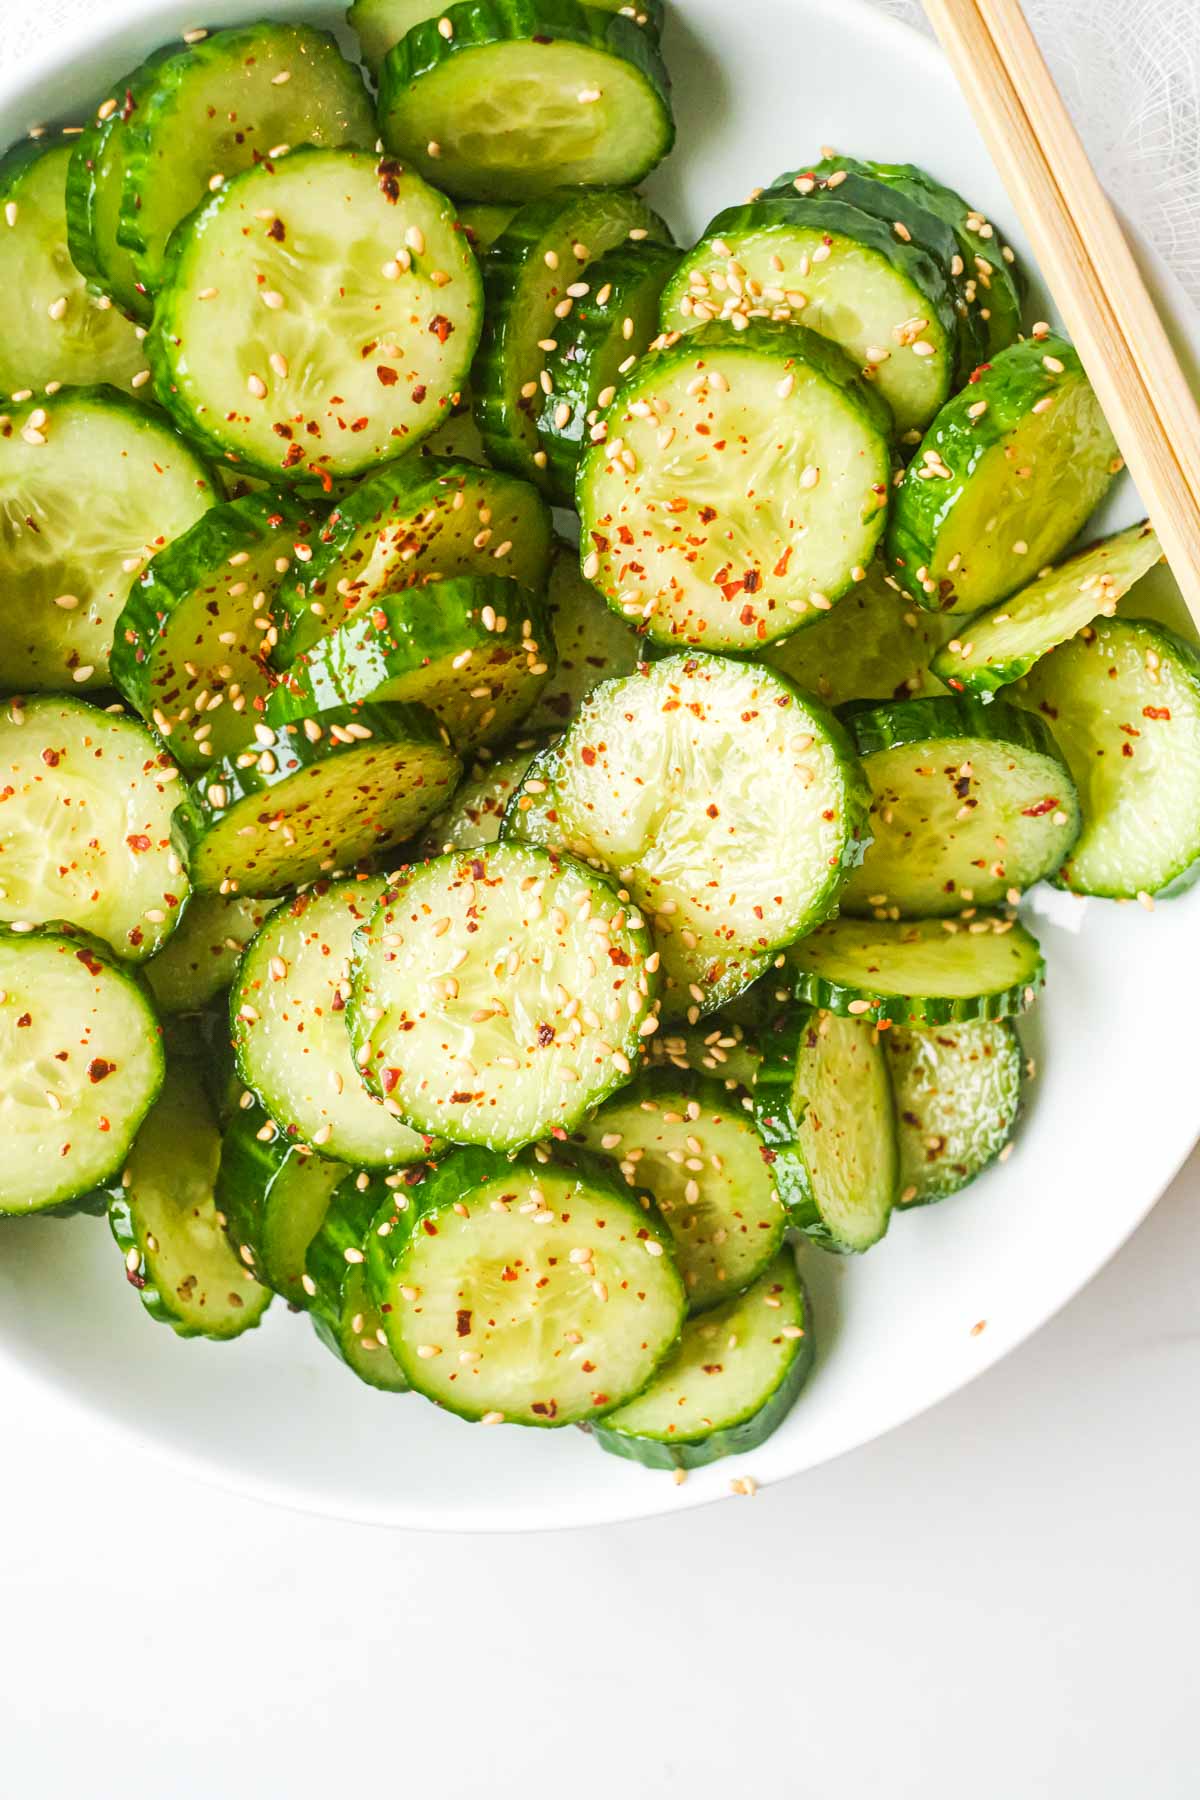 the finished asian cucumber salad ready to be served